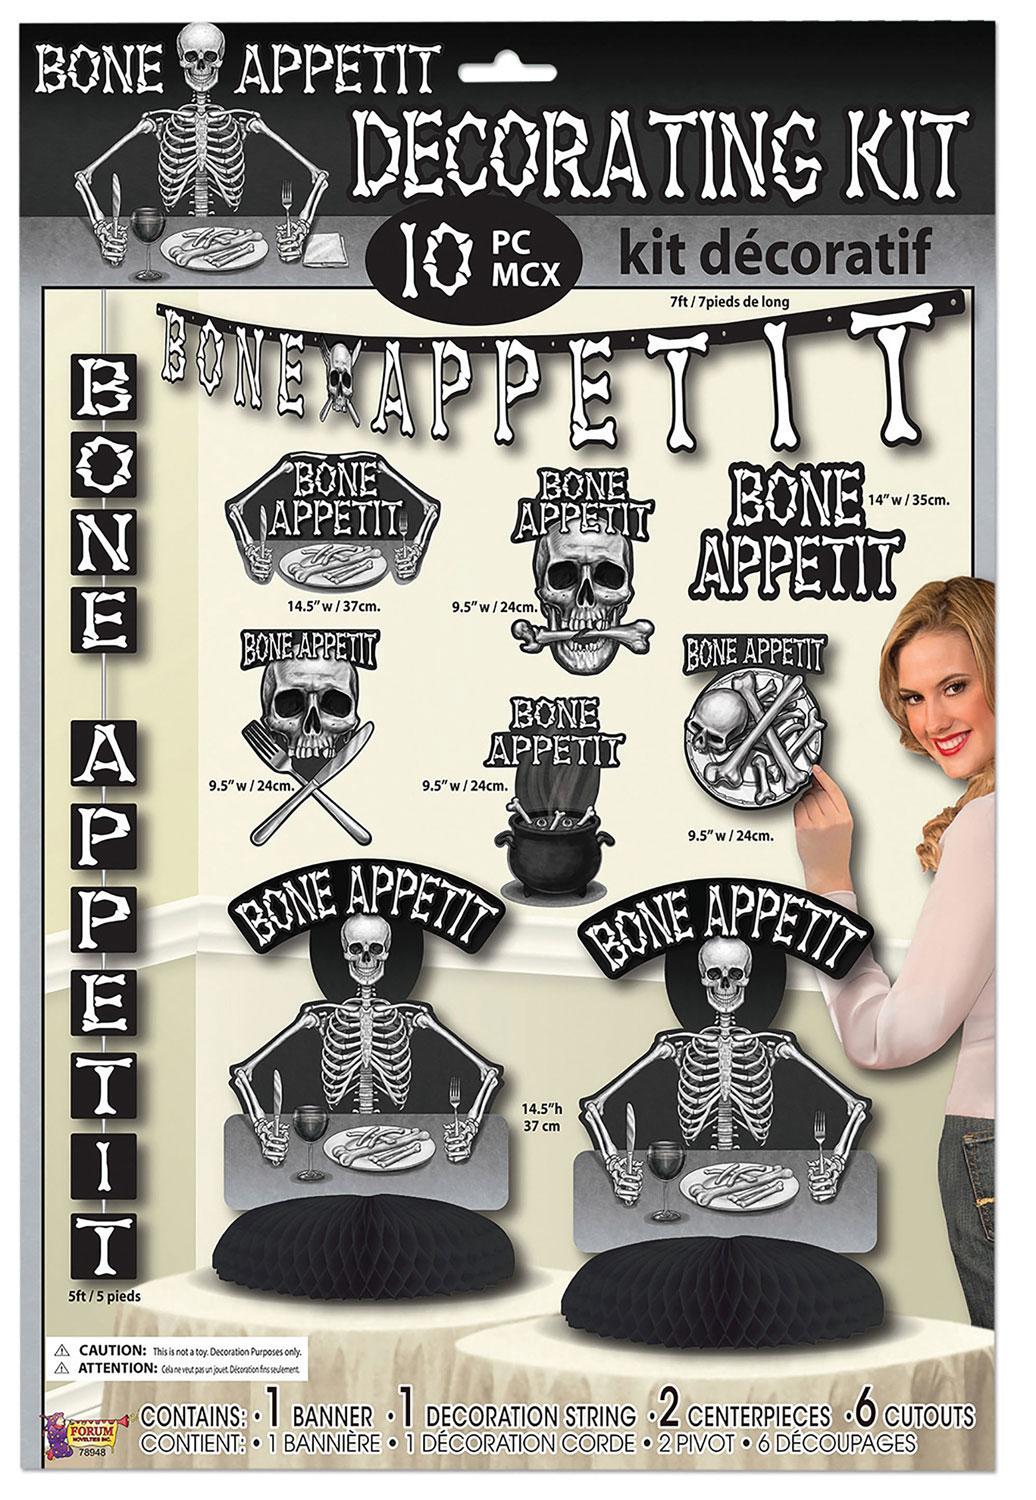 Bone Appetit Halloween Decorating Kit - 10pc by Forum Novelties 78948 available here at Karnival Costumes online Halloween shop